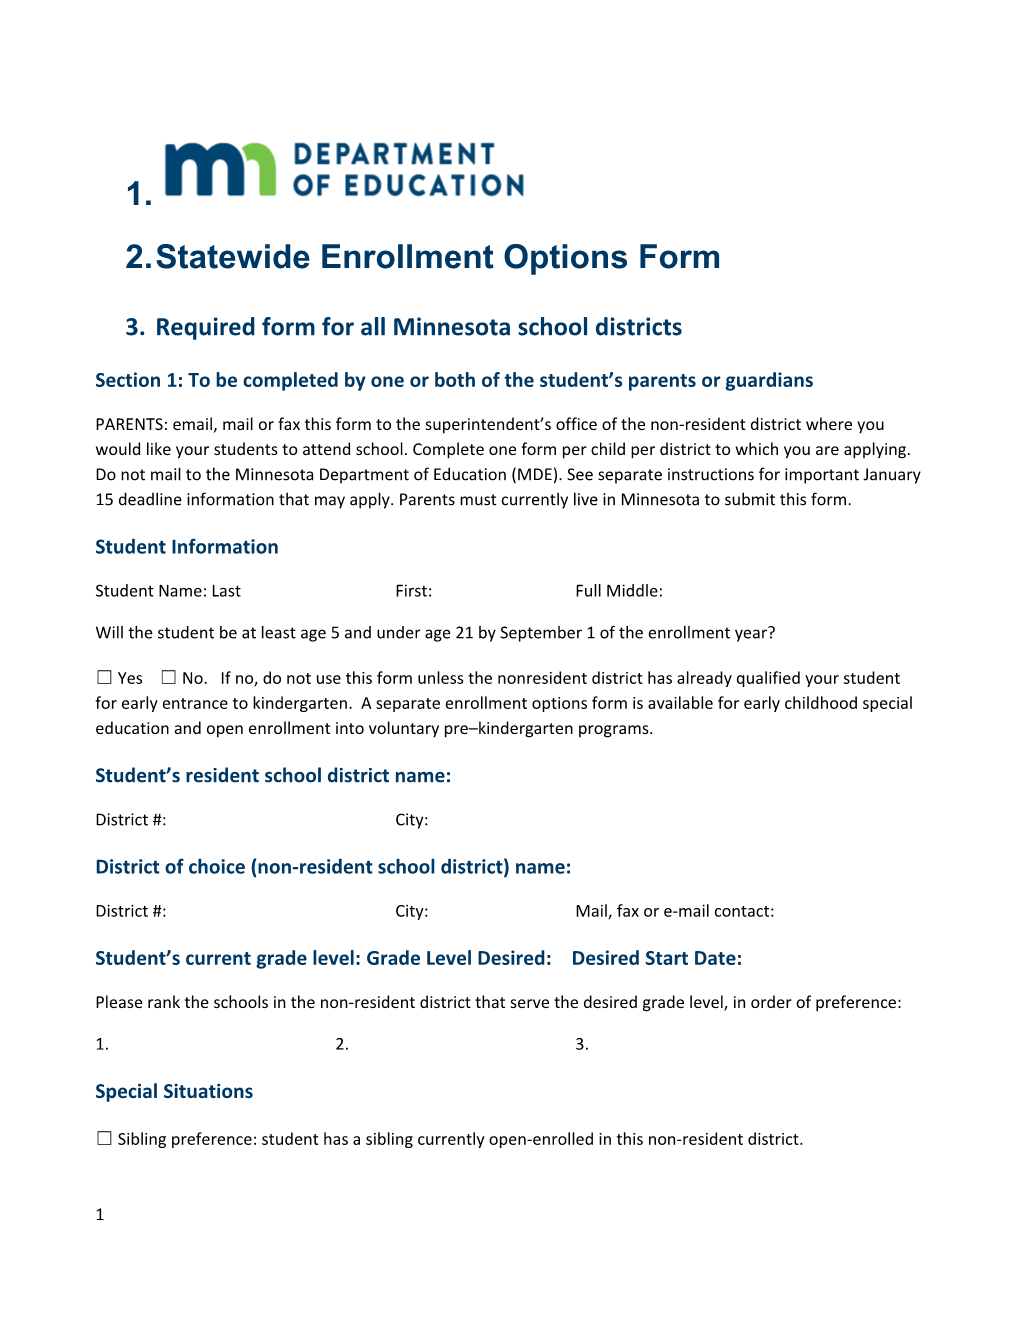 Required Form for All Minnesota School Districts